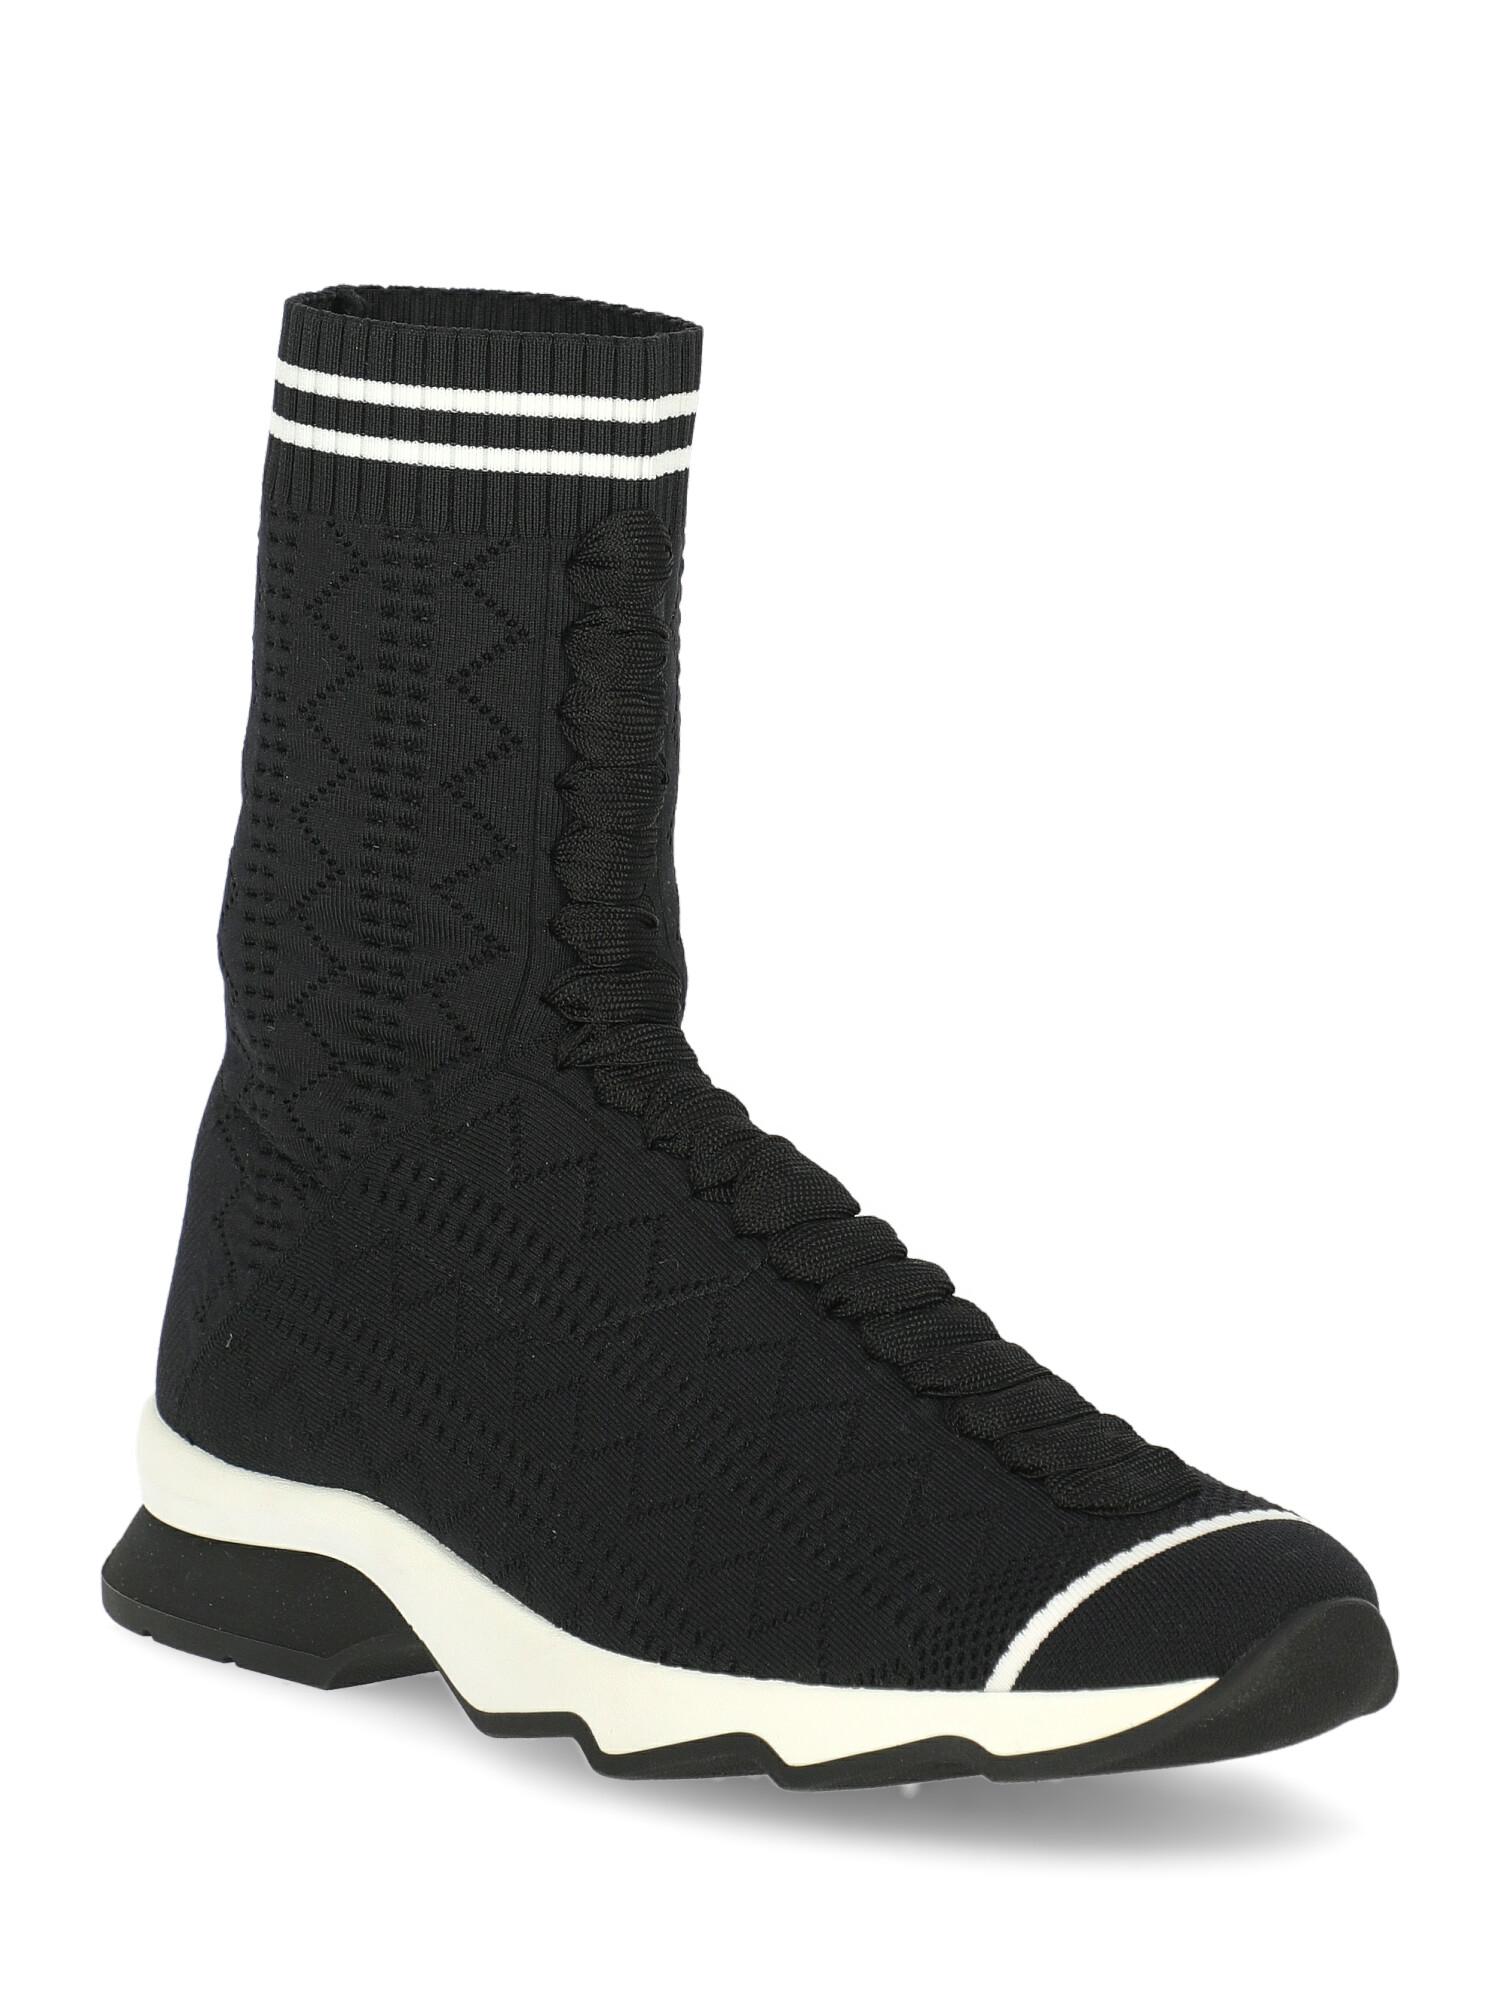 Shoe, fabric, other patterns, sock sneakers, elasticated, branded insole, decorative perforation

Product Condition: Excellent
Sole: negligible marks.

Composition:
Upper: 100% Fabric
Sole: 100% Rubber

Color: Black/Navy/White
Product ID: XU80010212